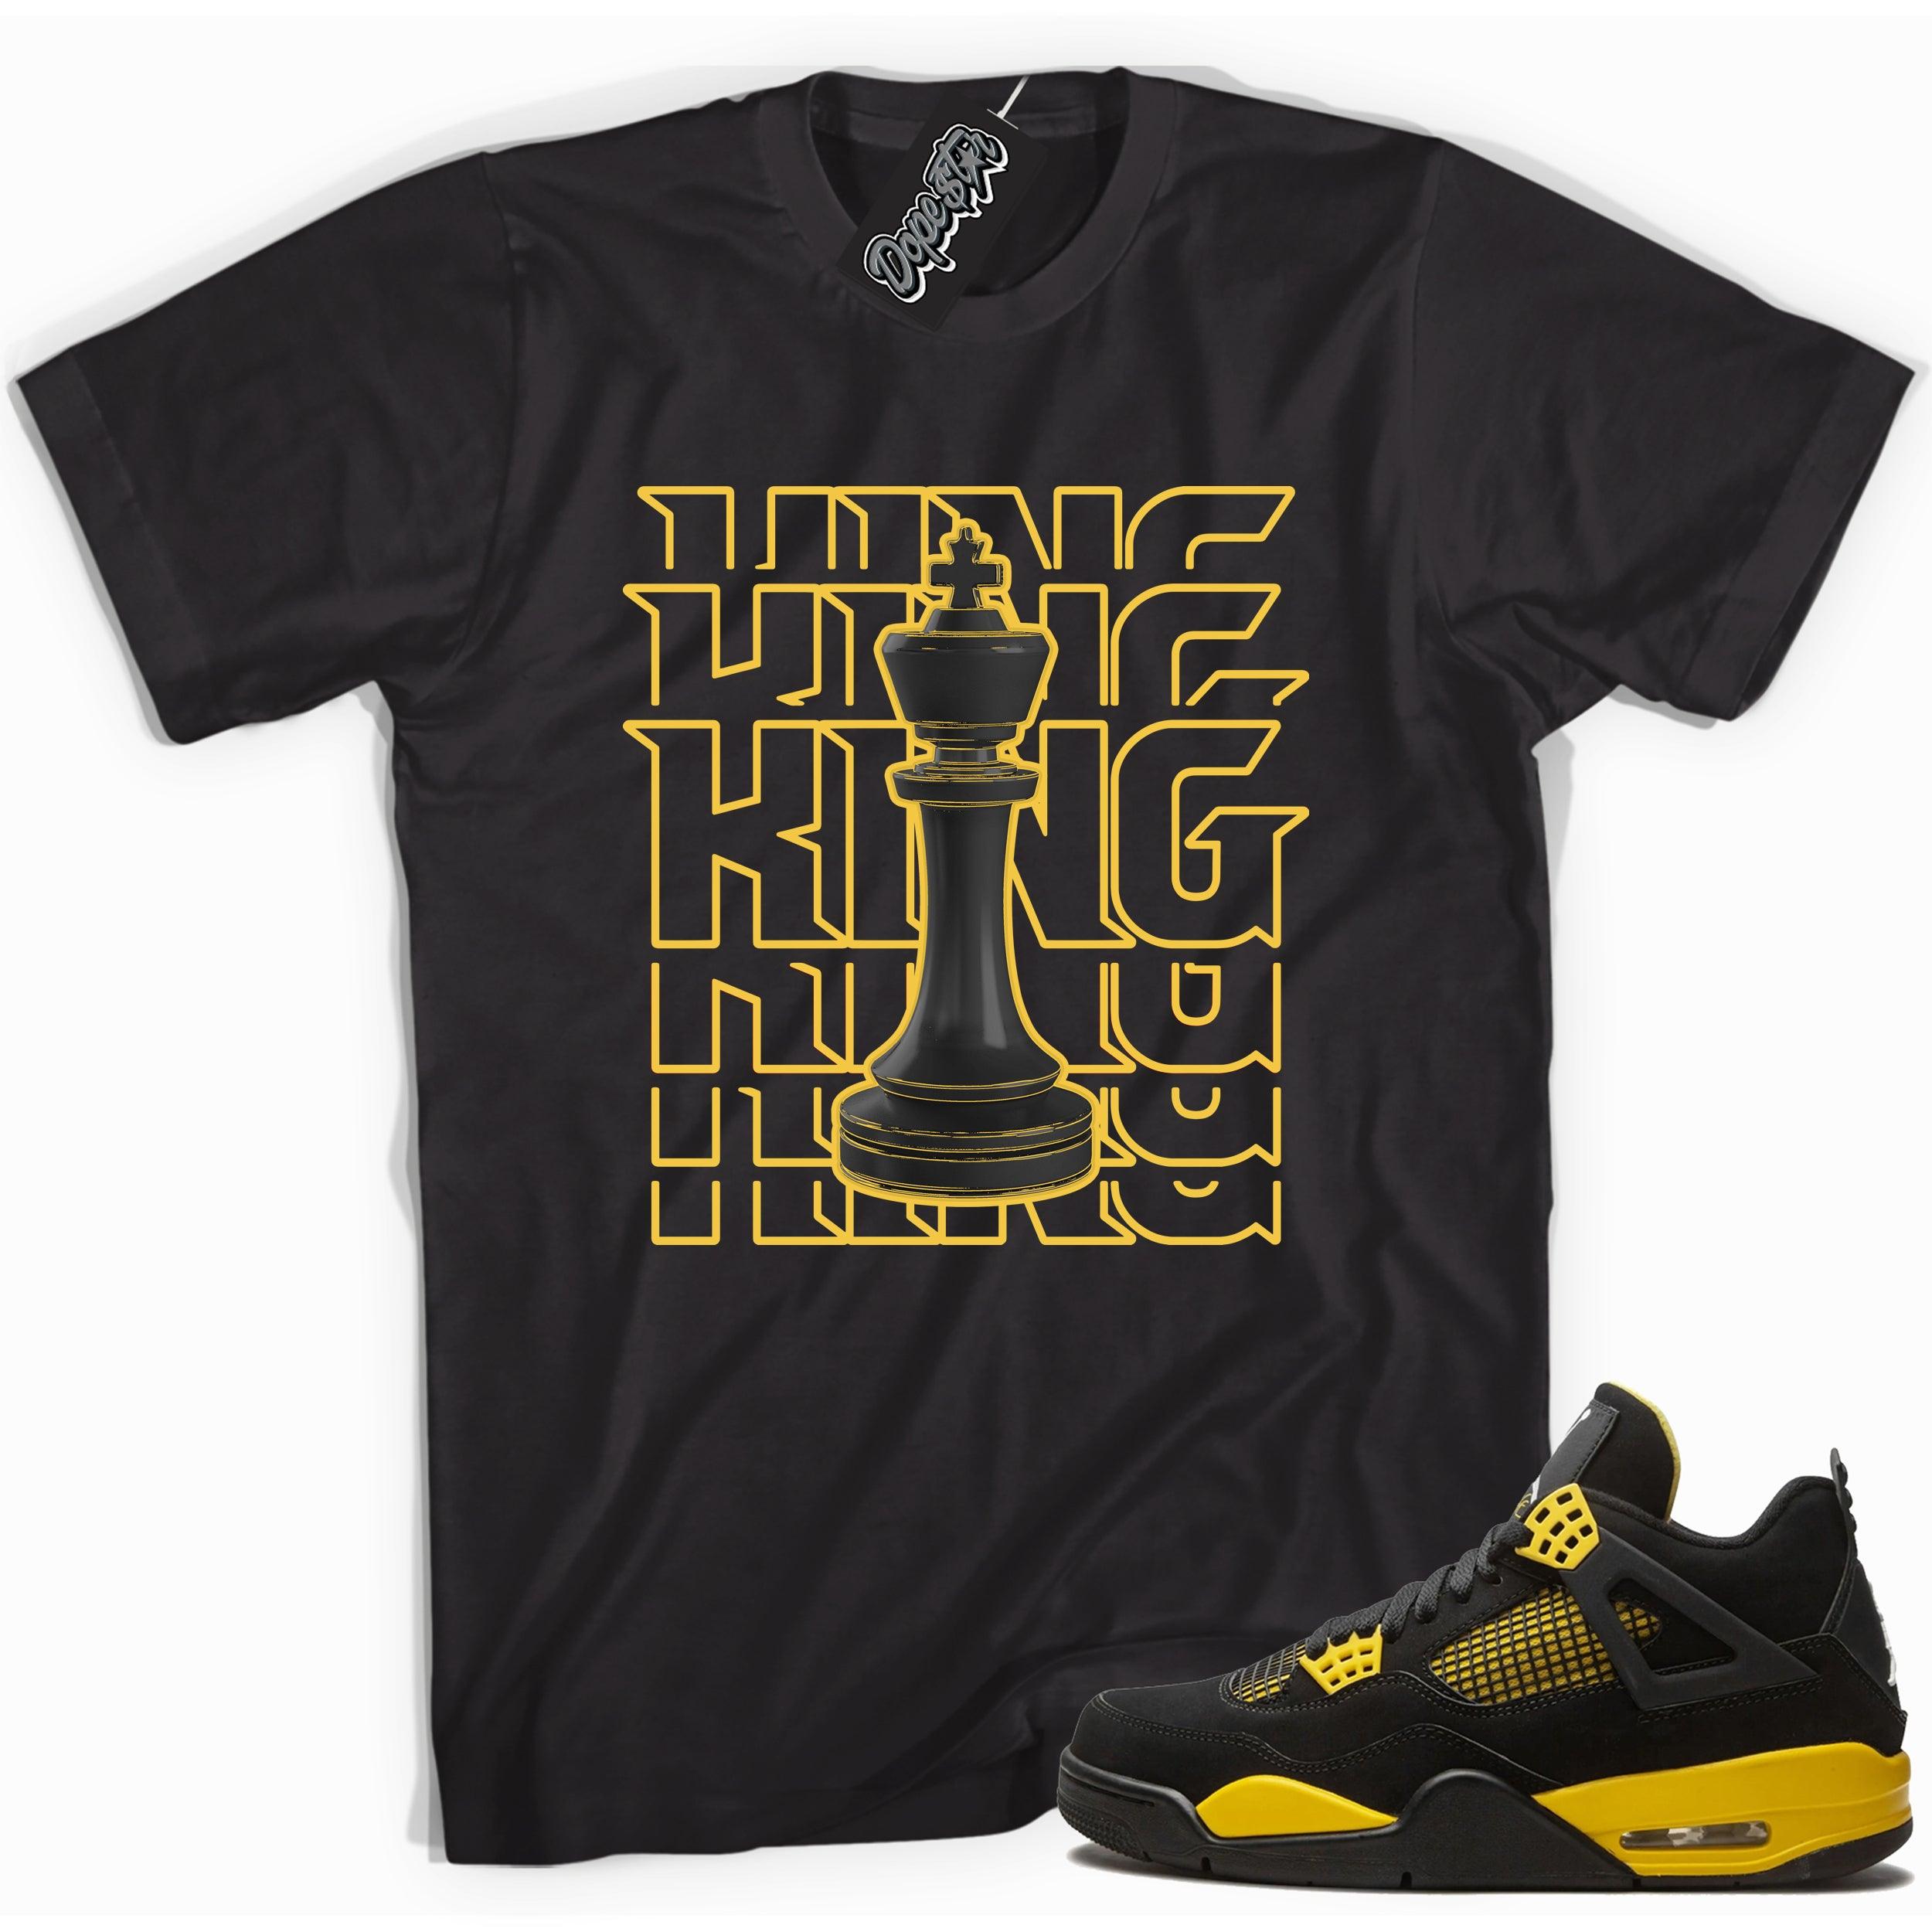 Cool black graphic tee with 'King chess piece' print, that perfectly matches  Air Jordan 4 Thunder sneakers